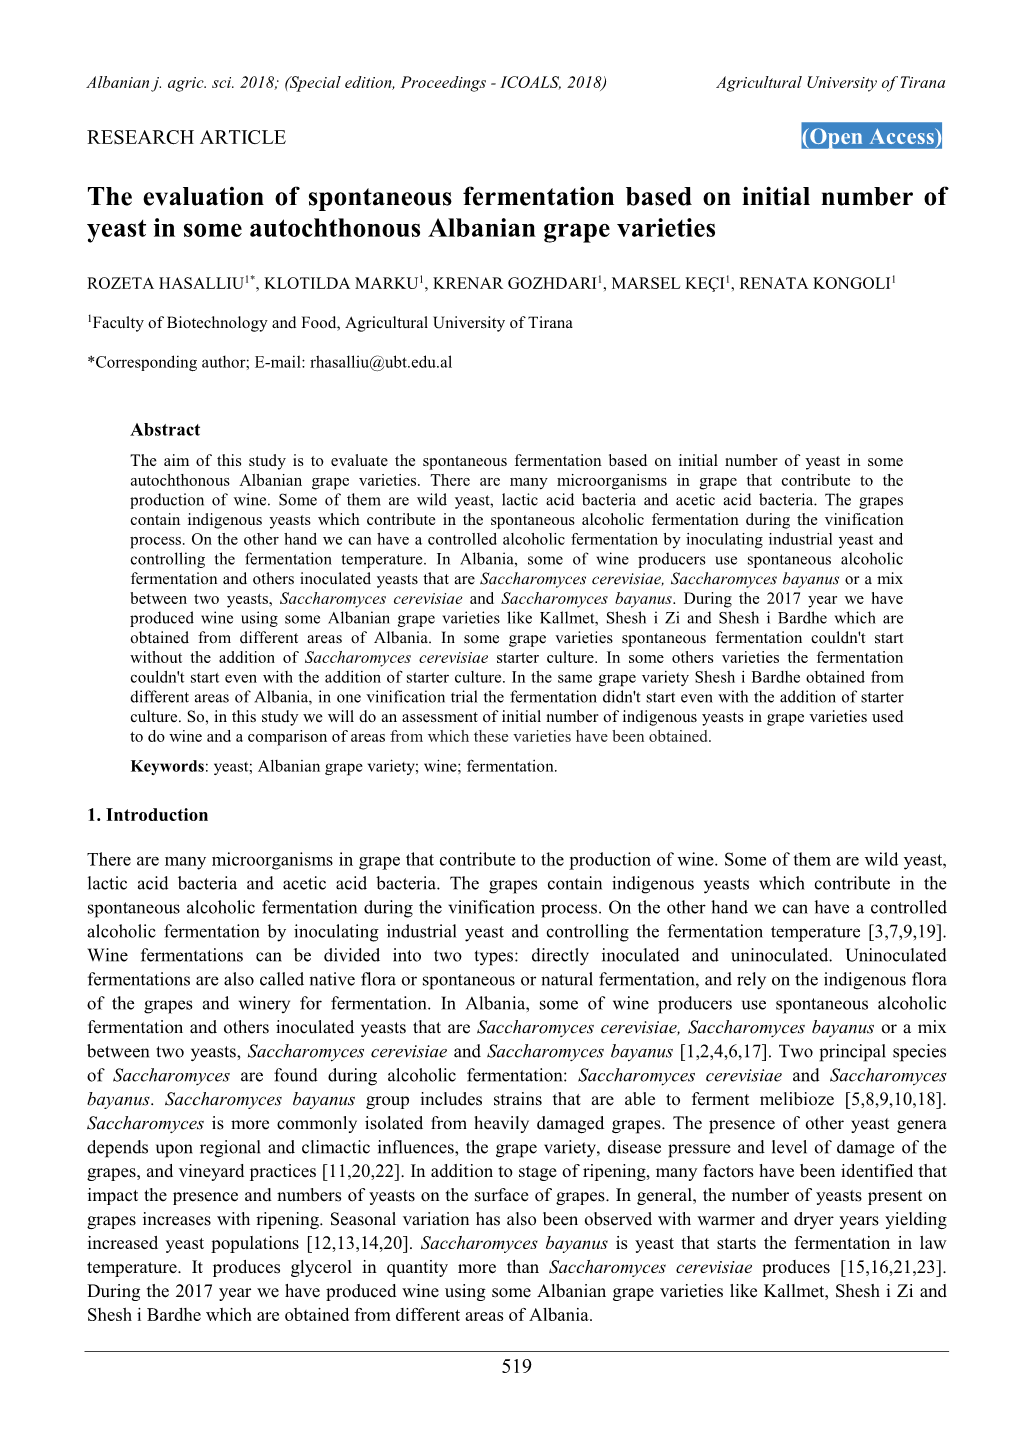 The Evaluation of Spontaneous Fermentation Based on Initial Number of Yeast in Some Autochthonous Albanian Grape Varieties